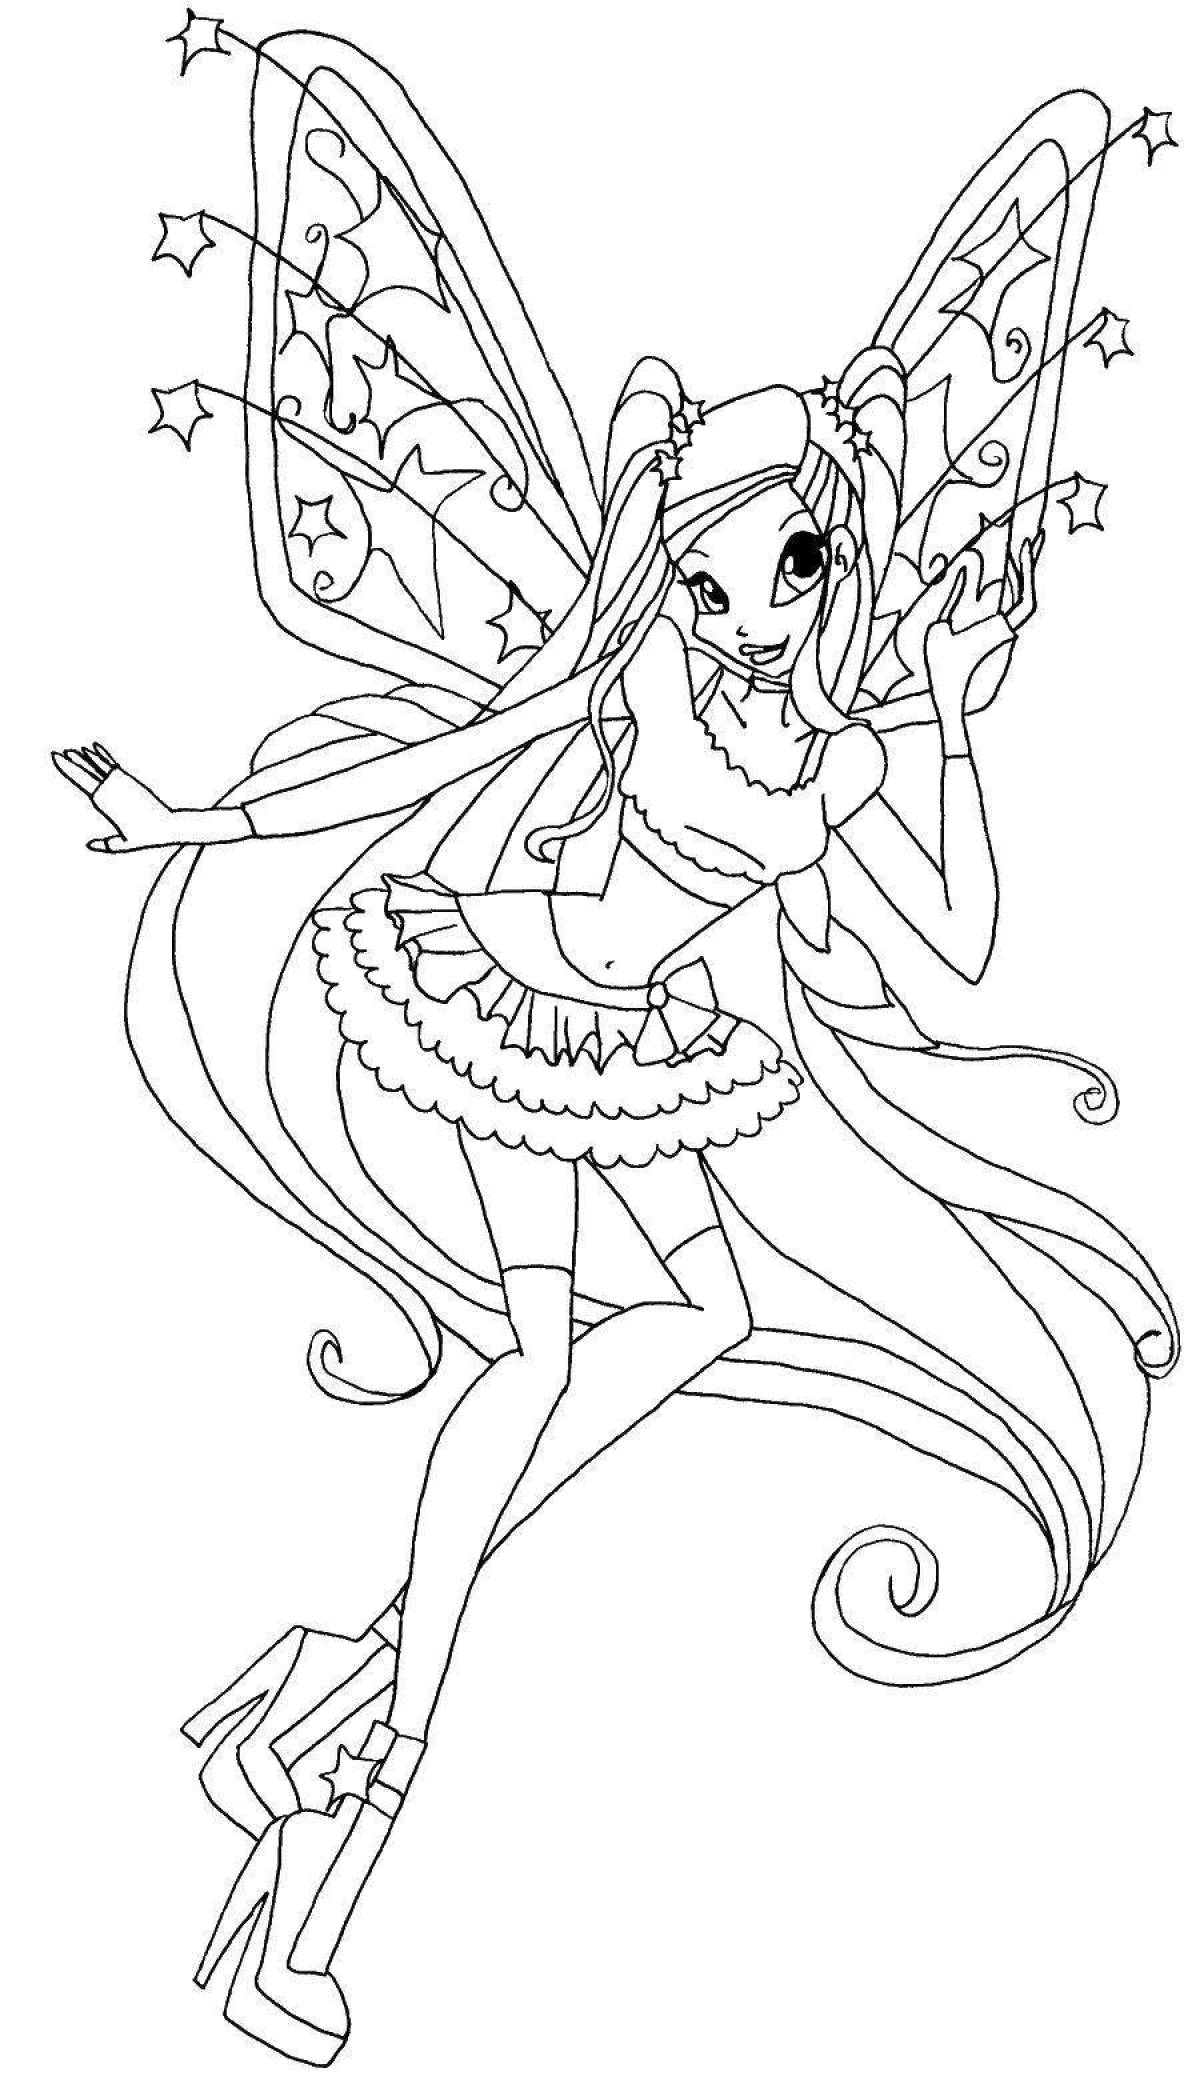 Awesome winx space coloring page